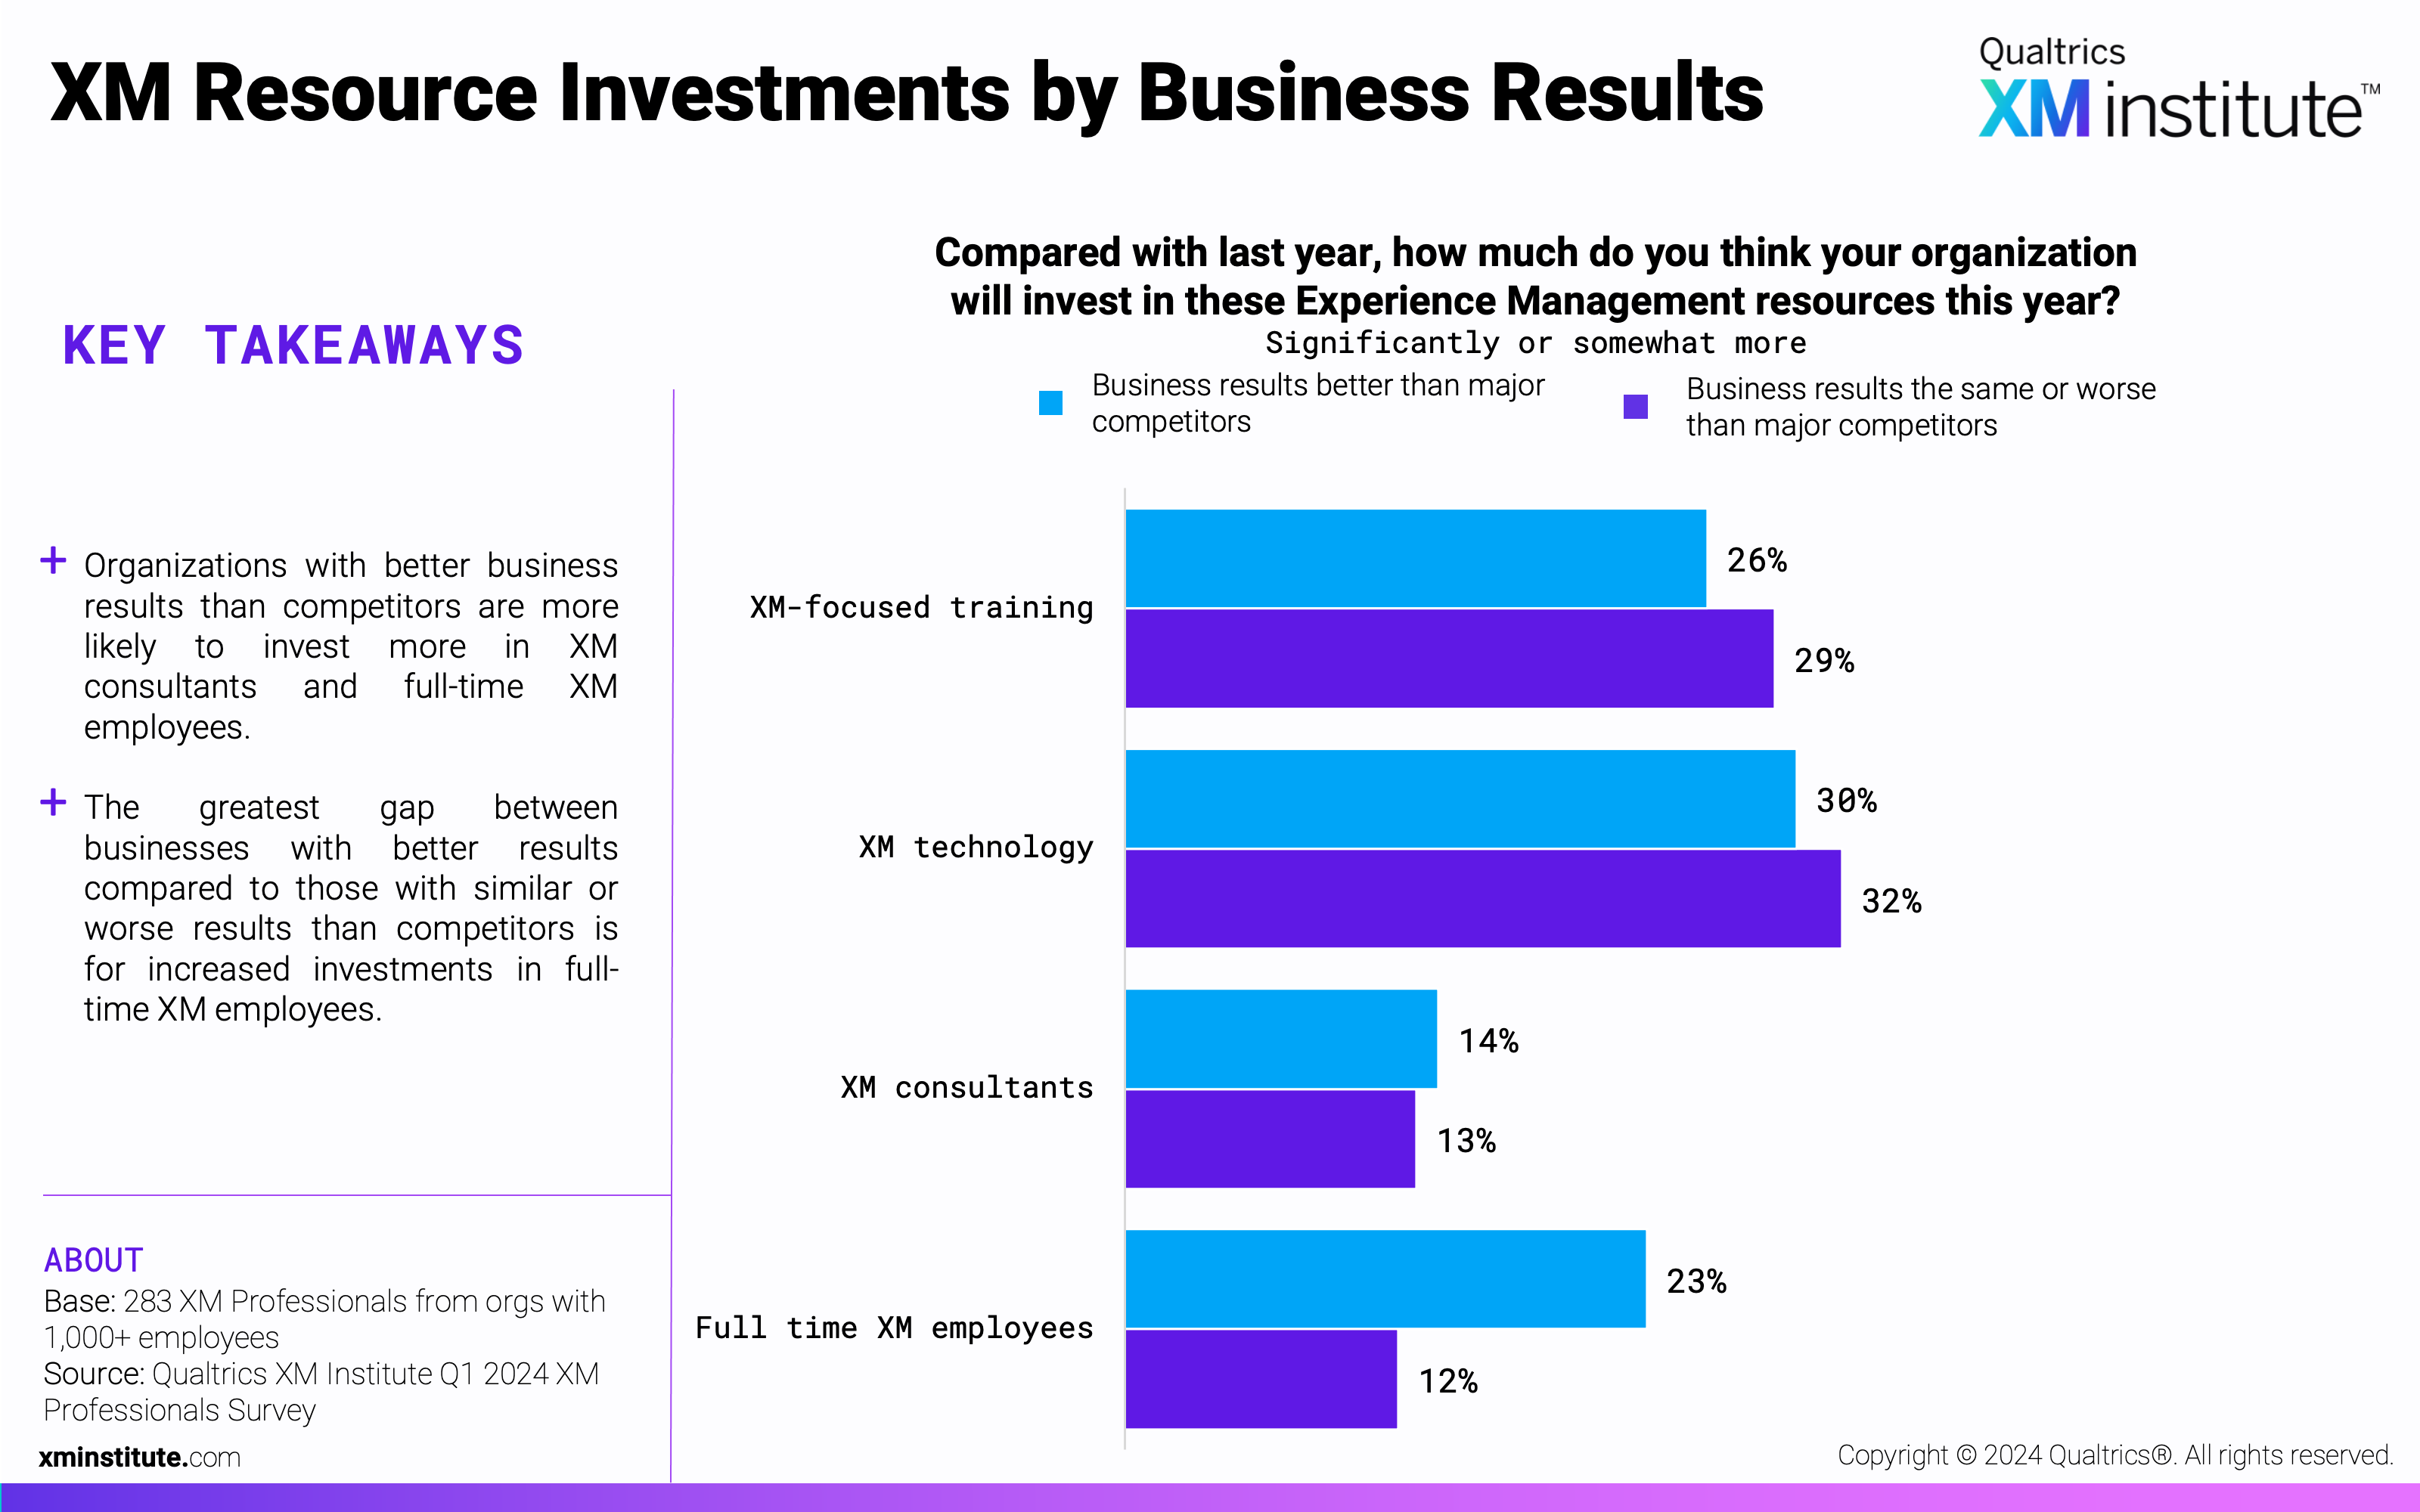 This chart shows how much respondents' organizations will invest in XM resources this year according to their business results. 